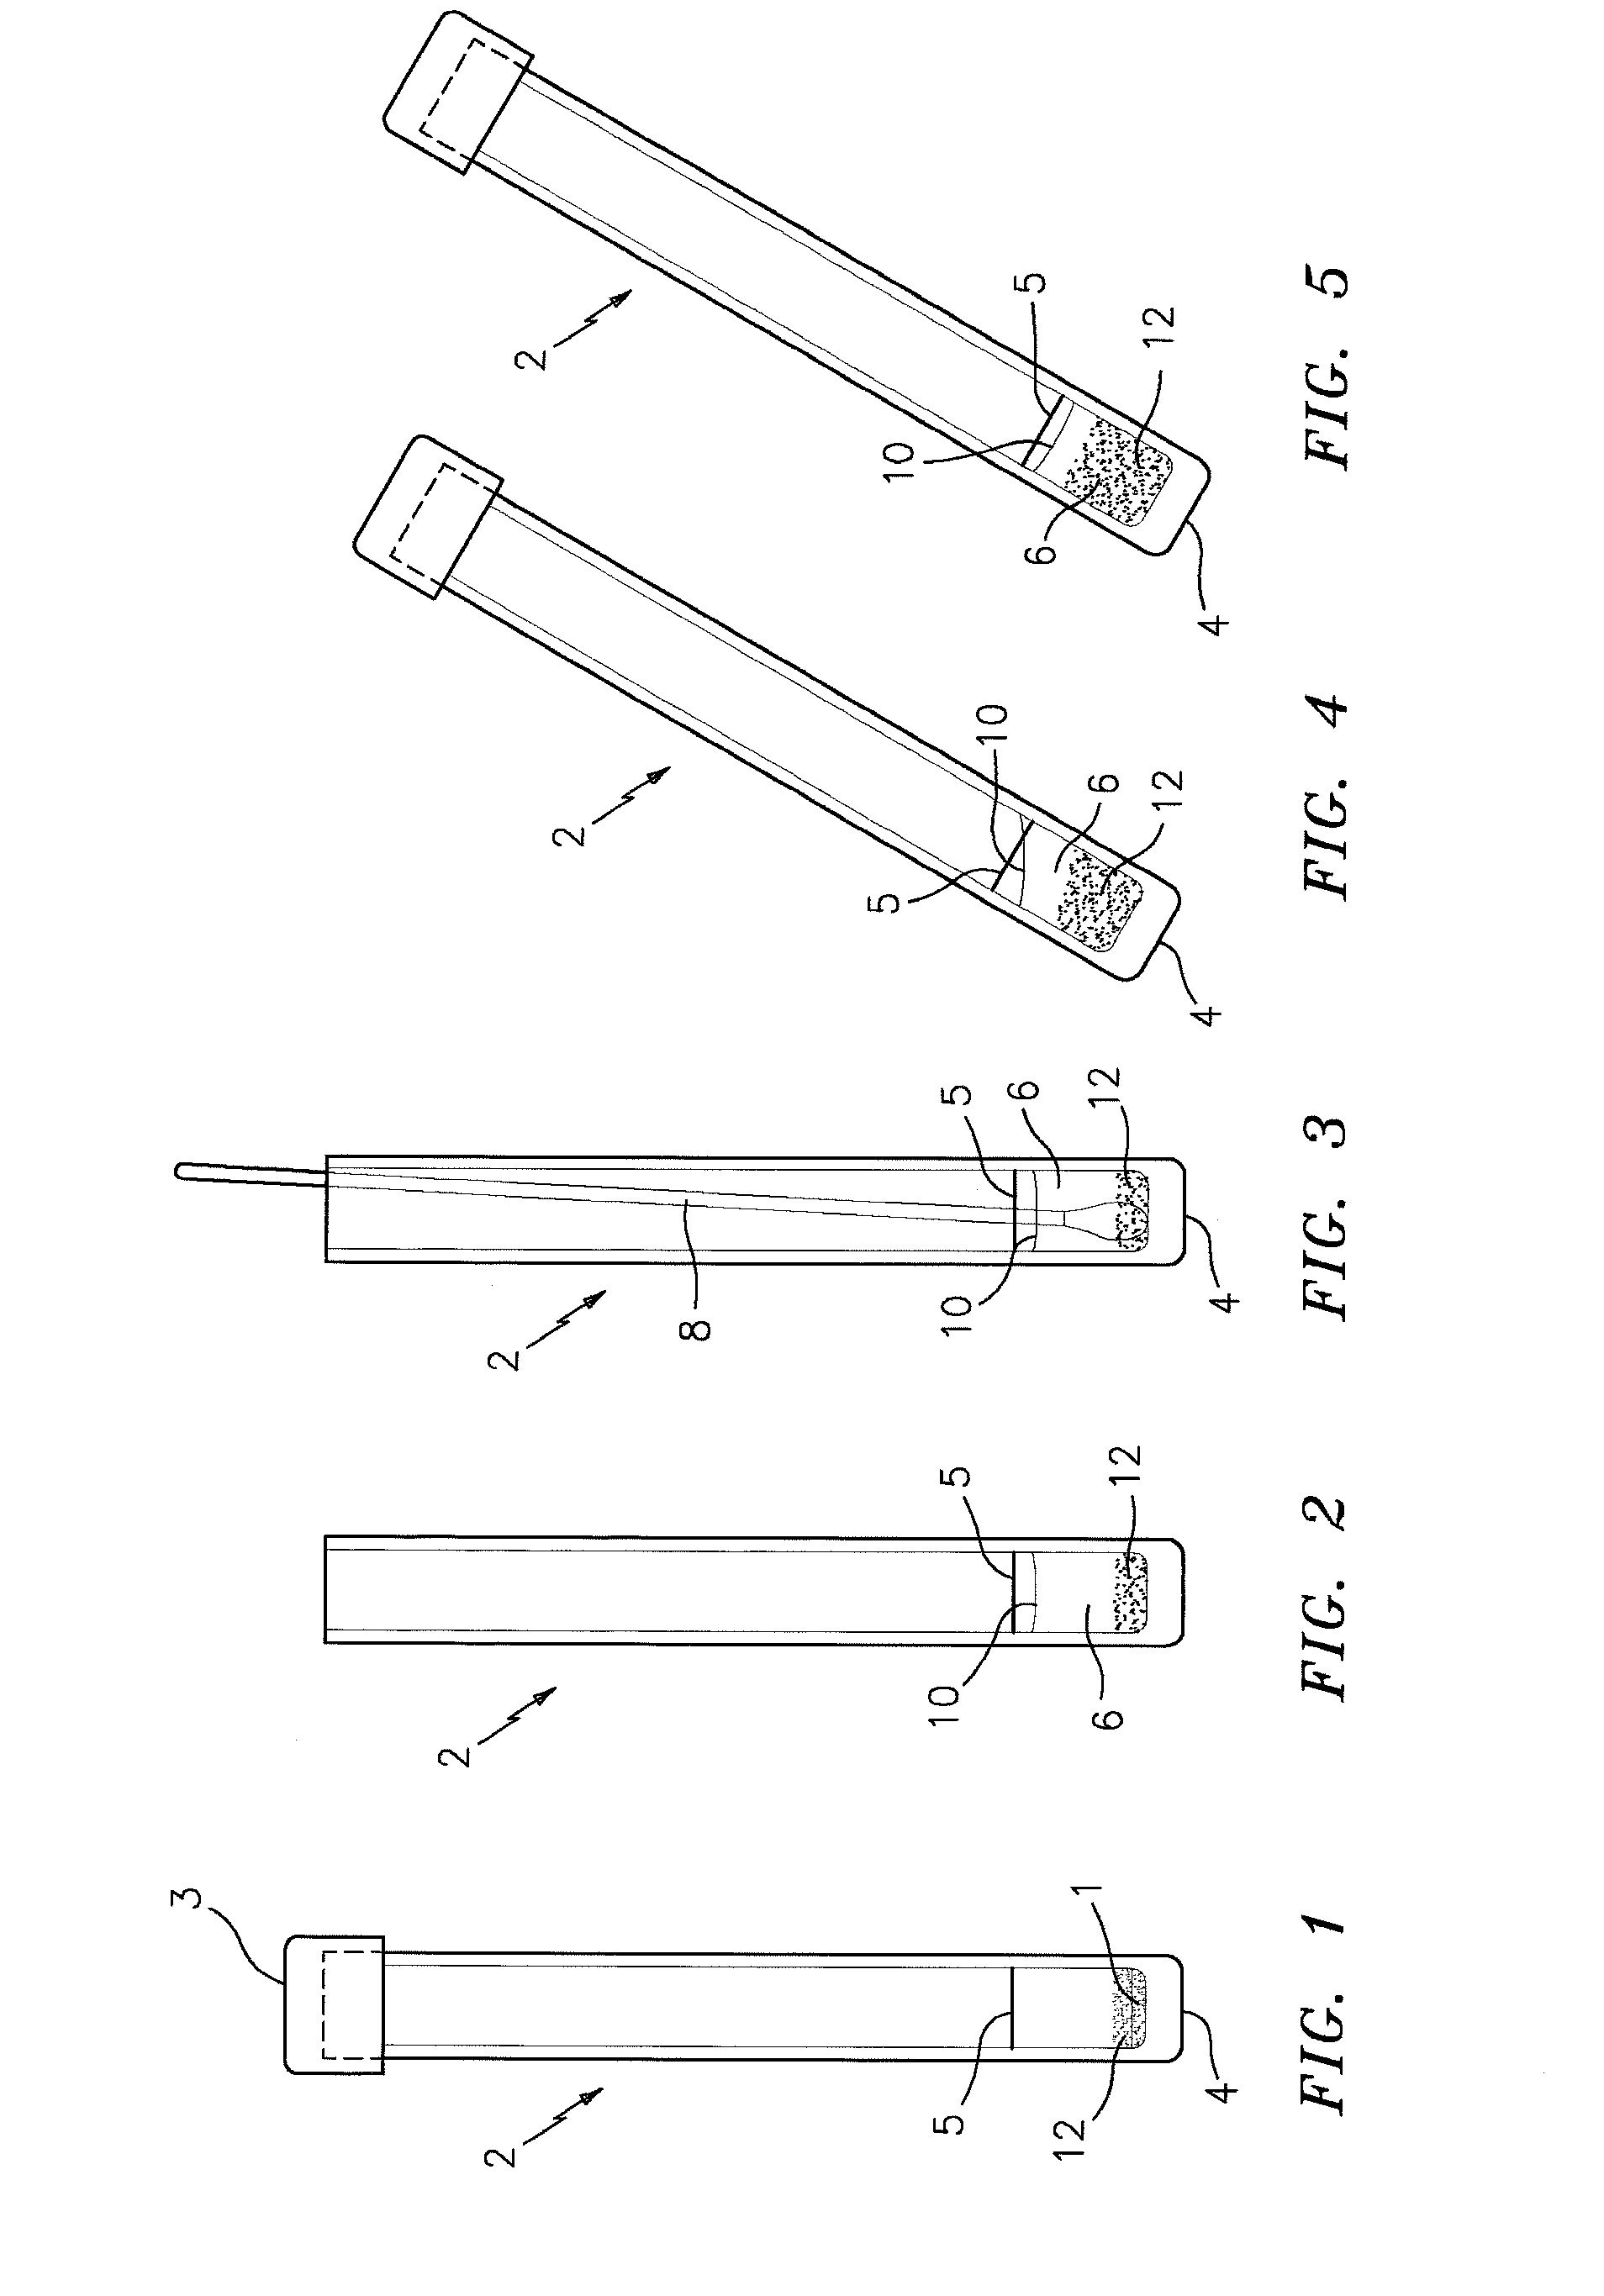 Method and reagents for detecting the presence or absence of staphylococcus aureus in a test sample